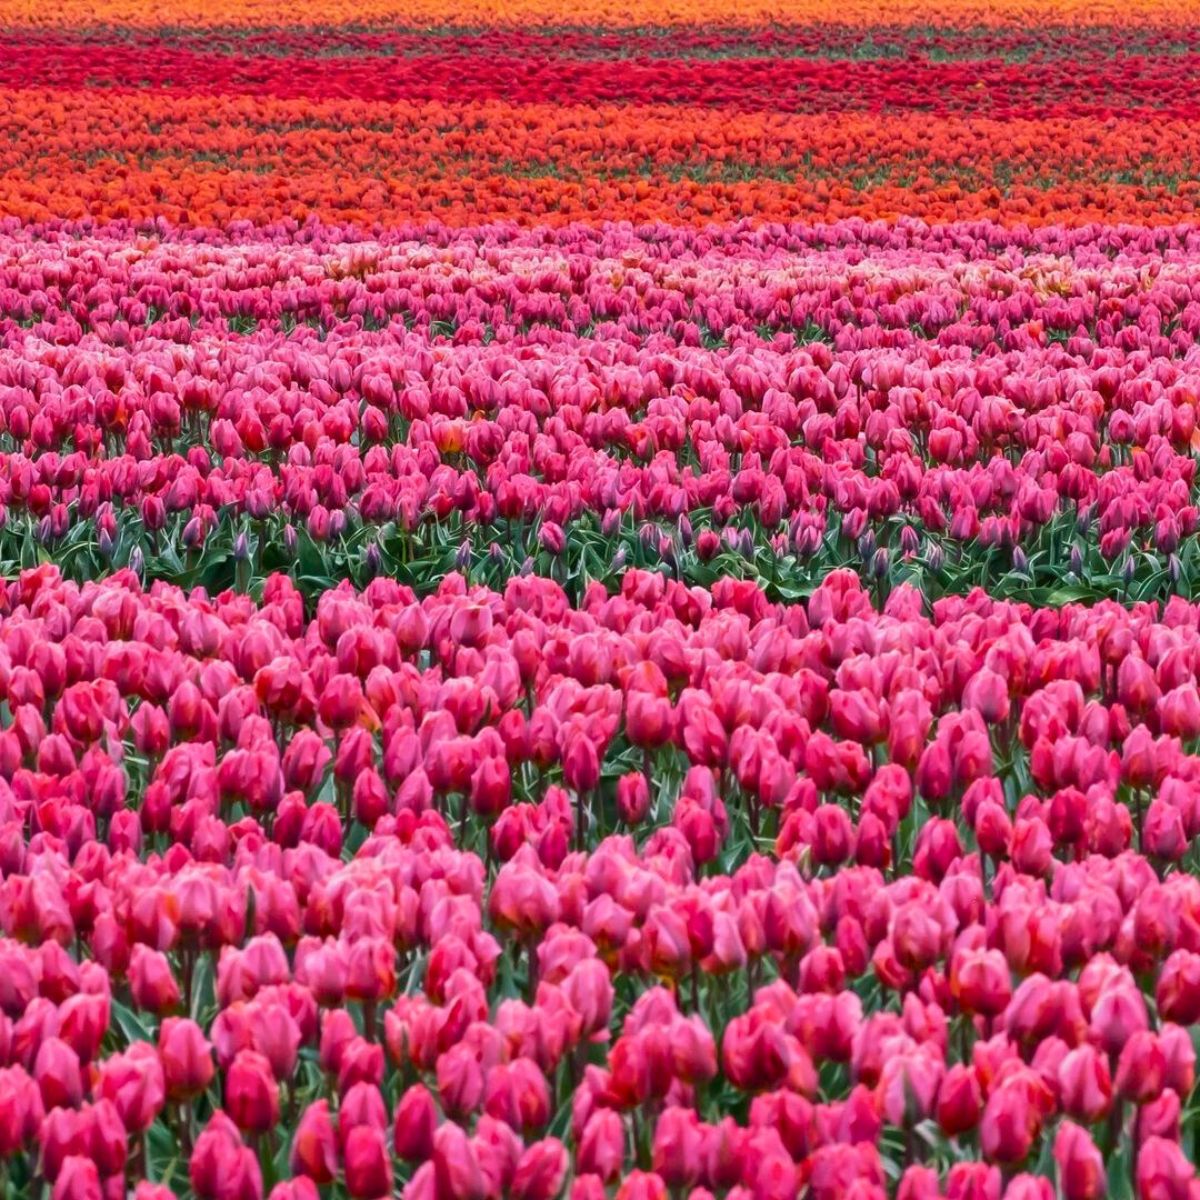 Changing colors in a dazzling tulip field